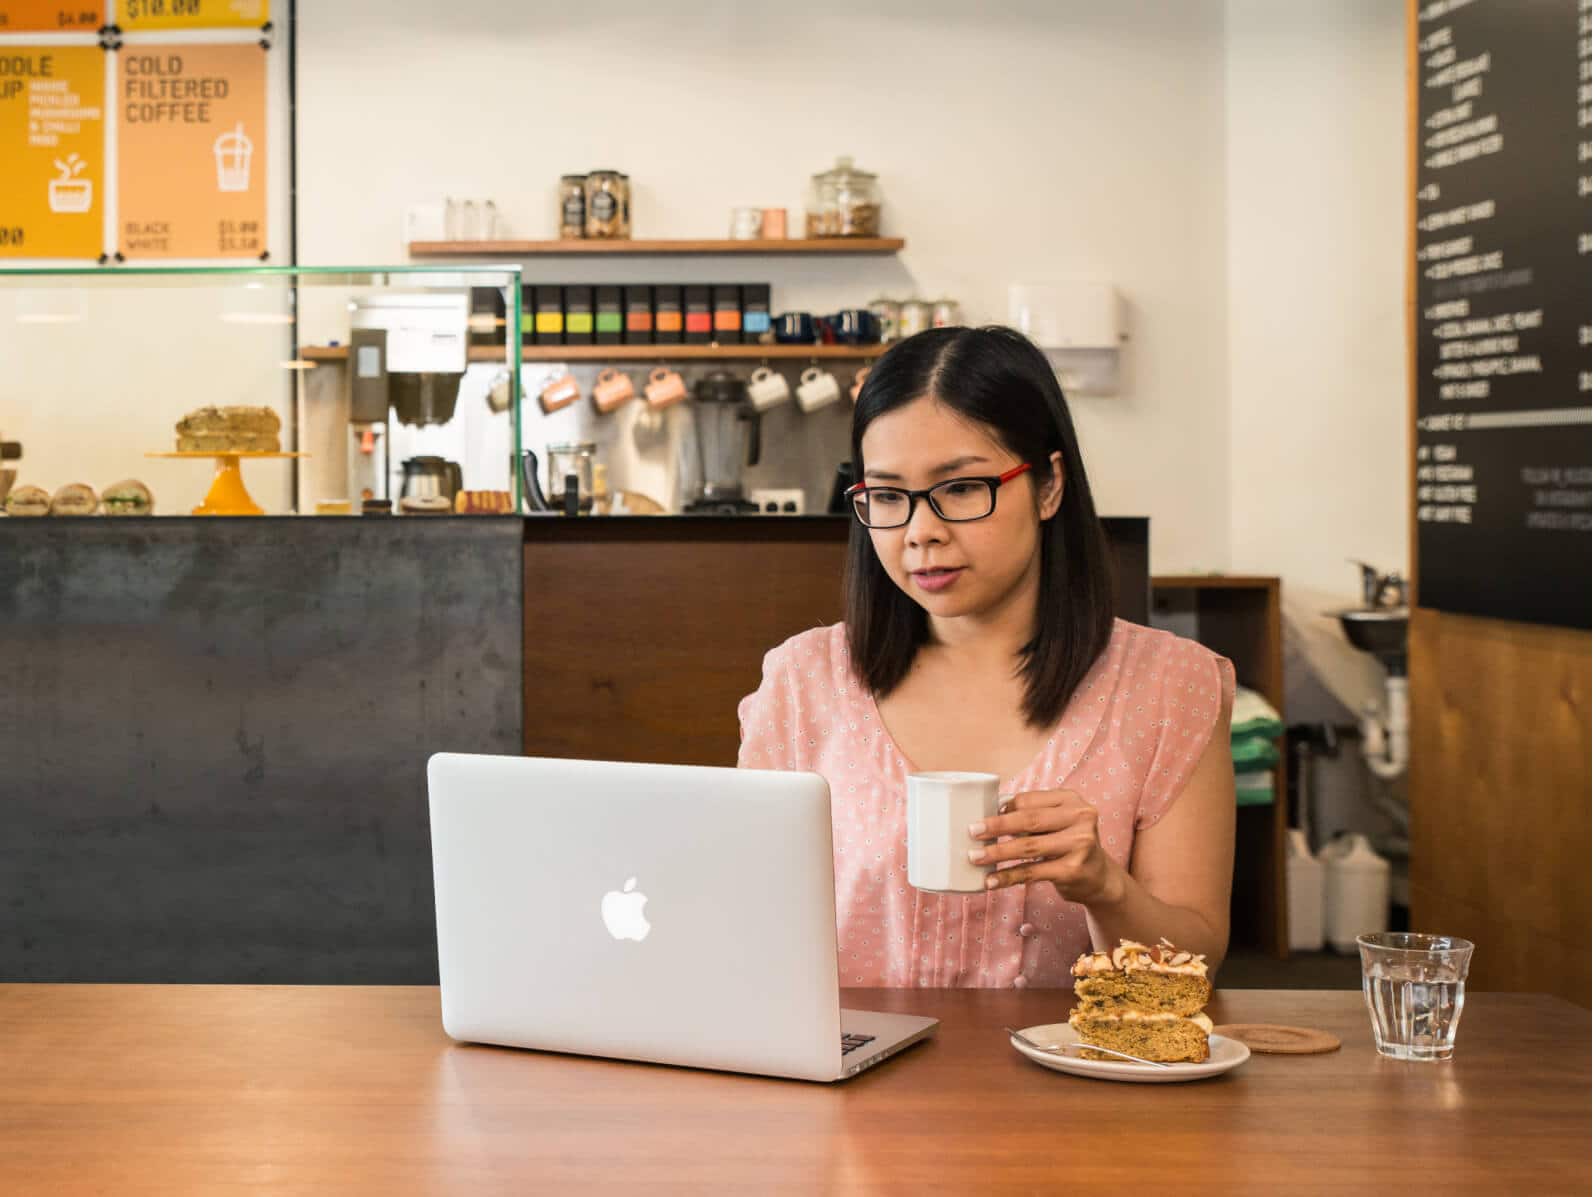 An accountant works on client workpapers at their laptop in a cafe.